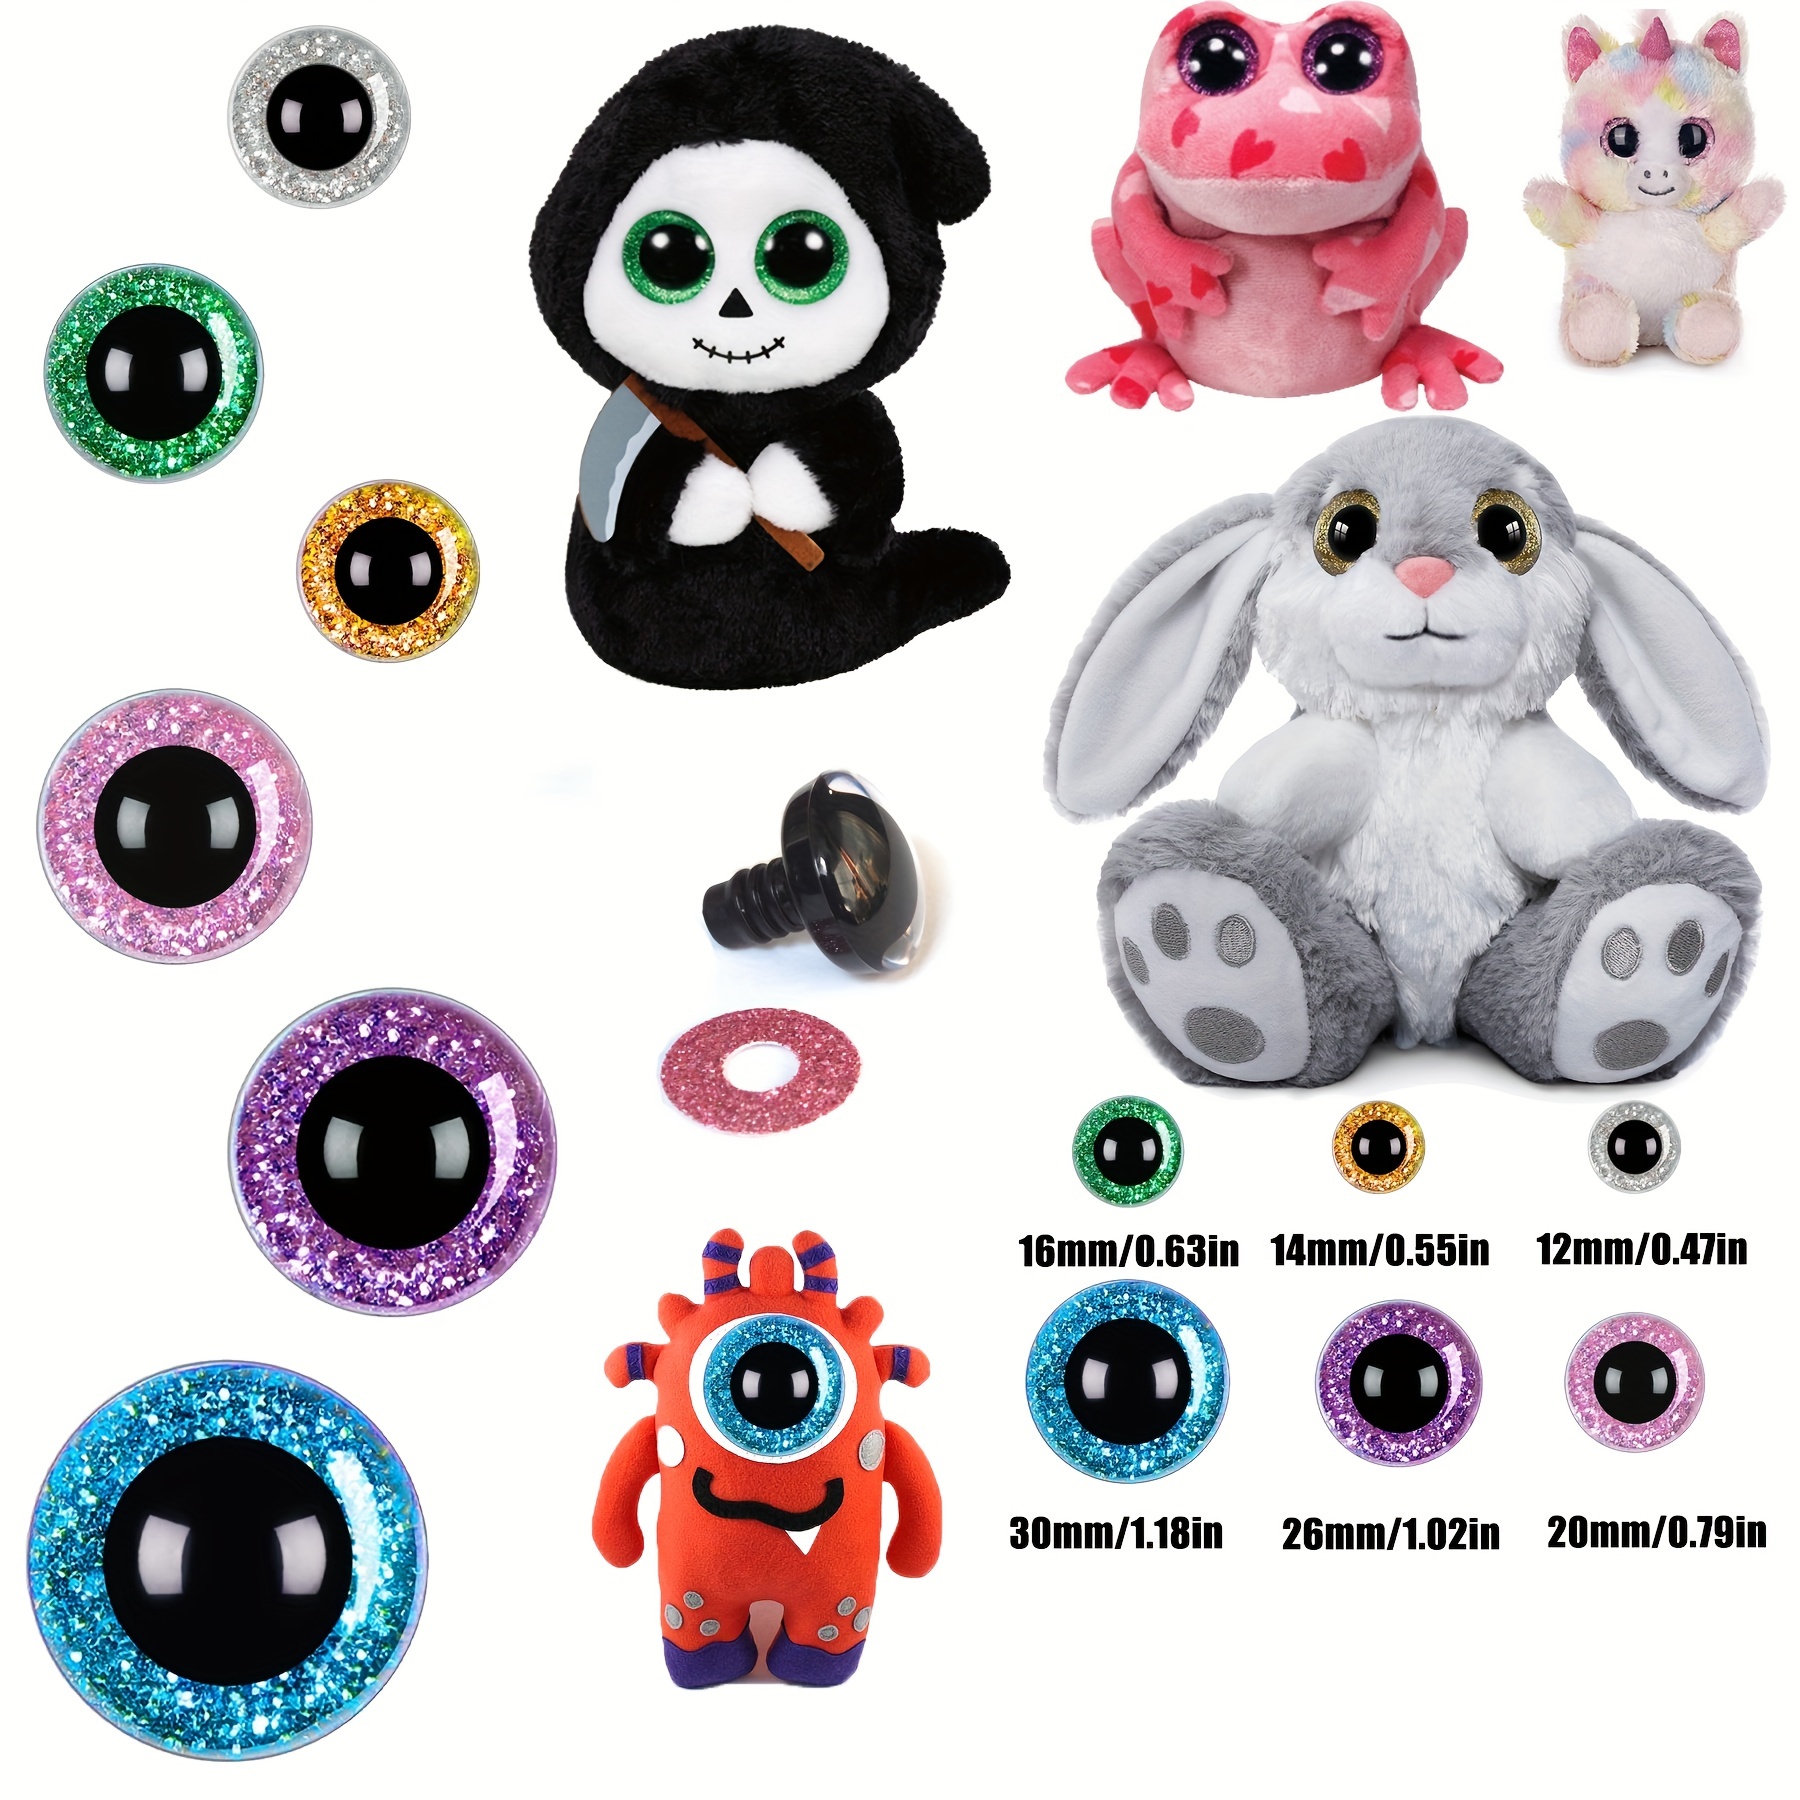 Safety Eyes for Crochet Plastic Colorful with Washers Black Amigurumi  Stuffed Animal Eyes for Crafts Teddy Bear Making Supplies - AliExpress